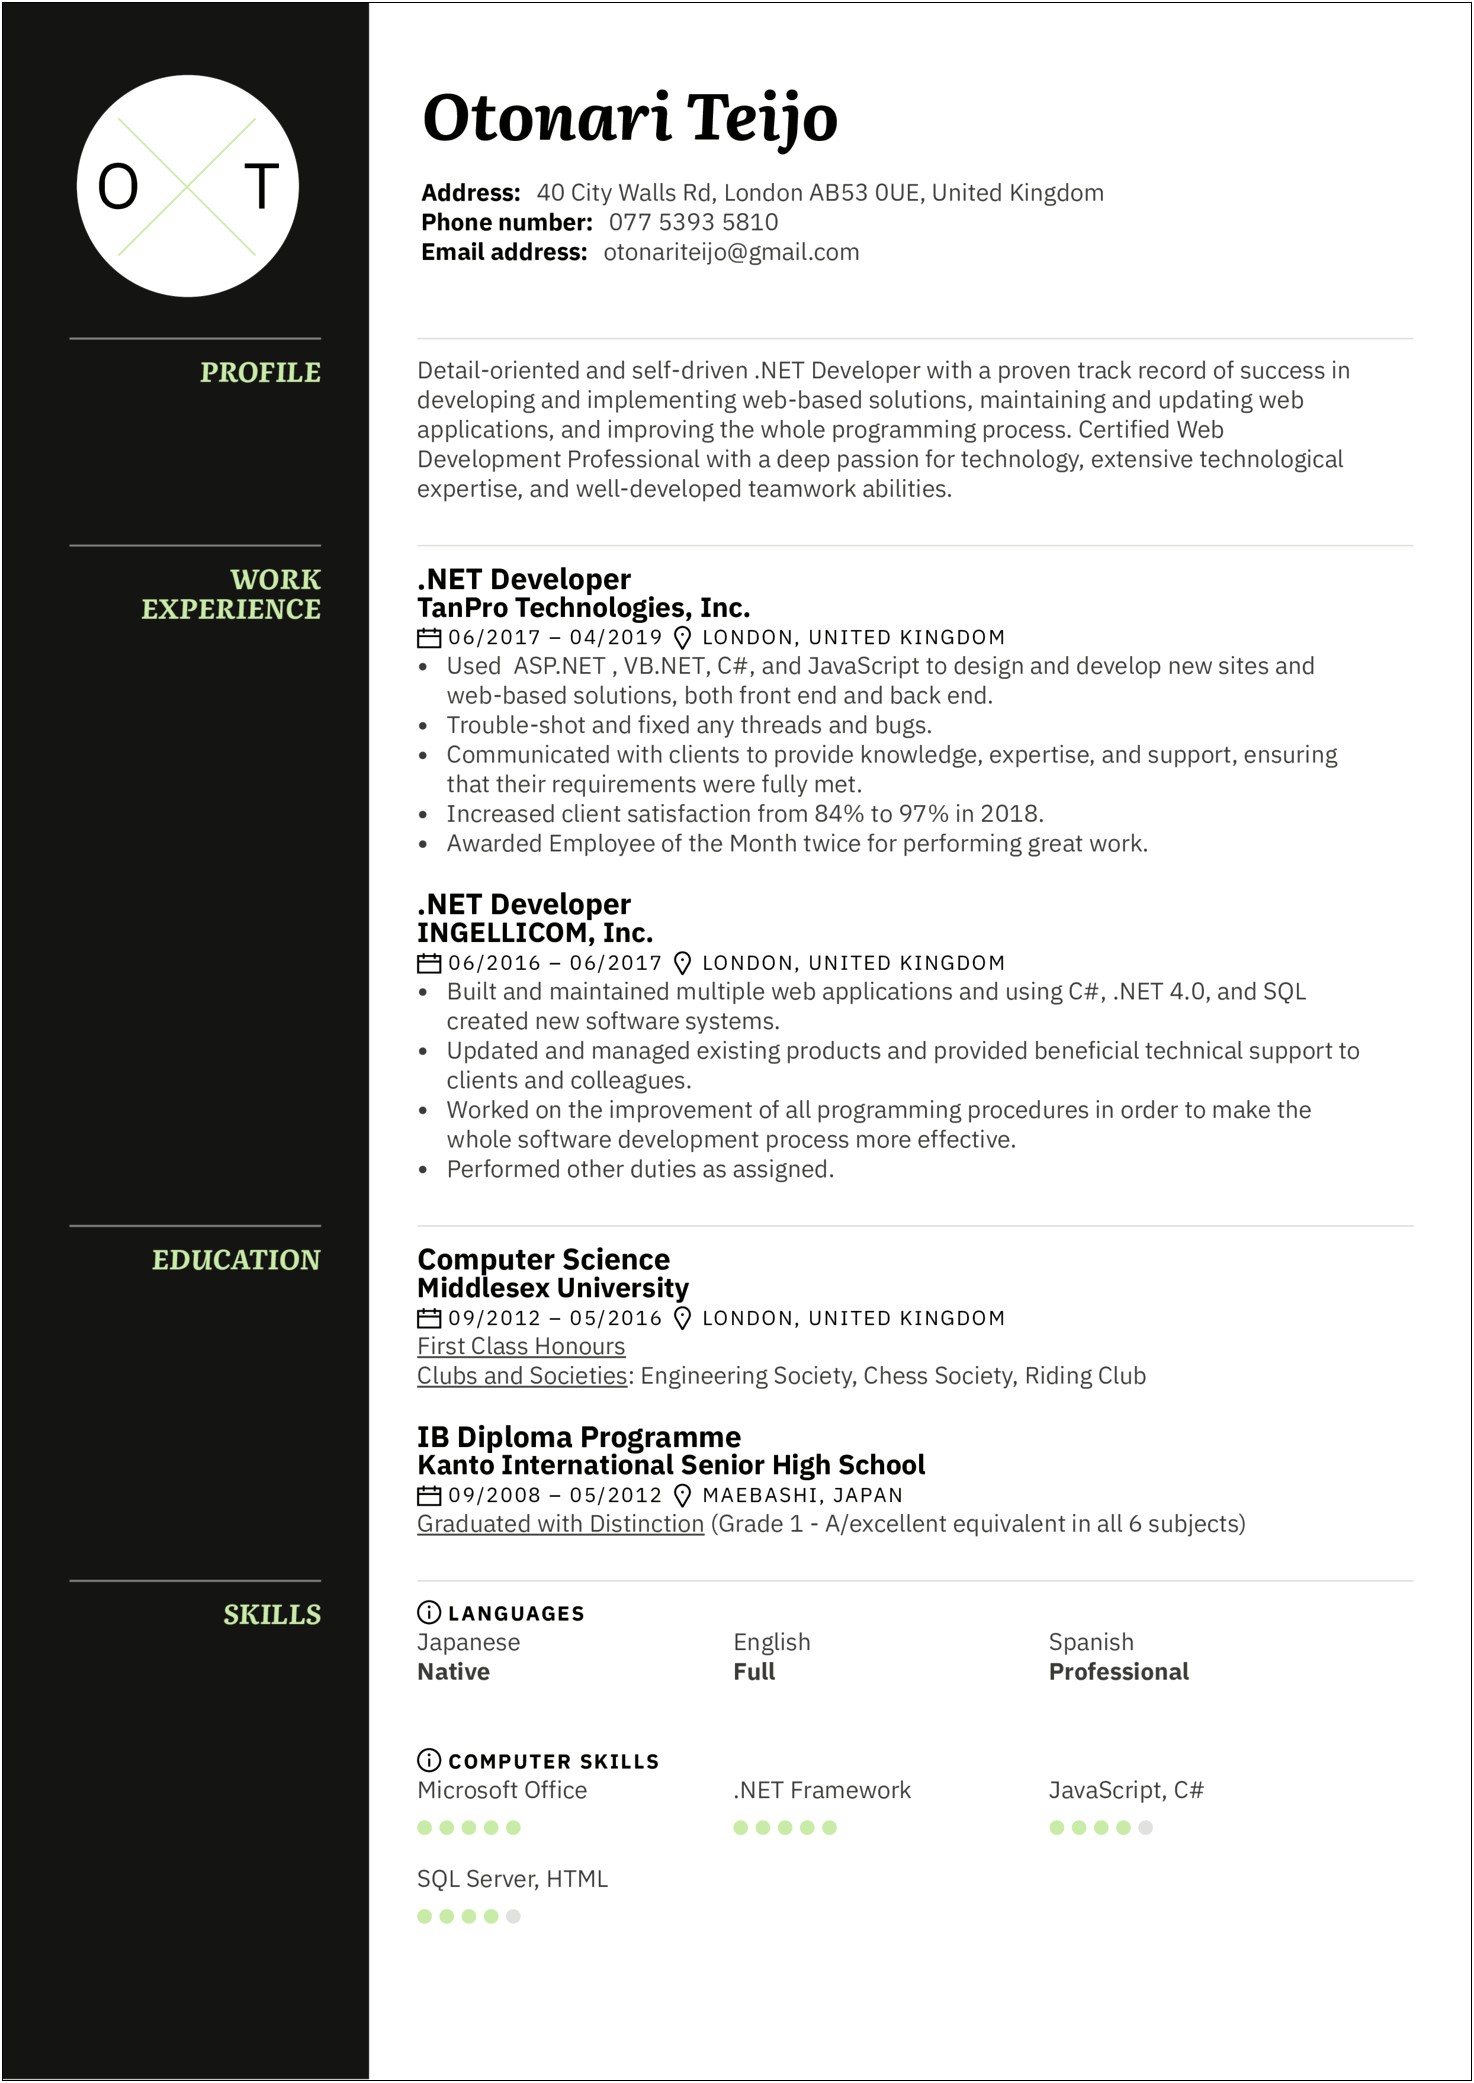 Self Taught Web Dev Resume Objective Examples